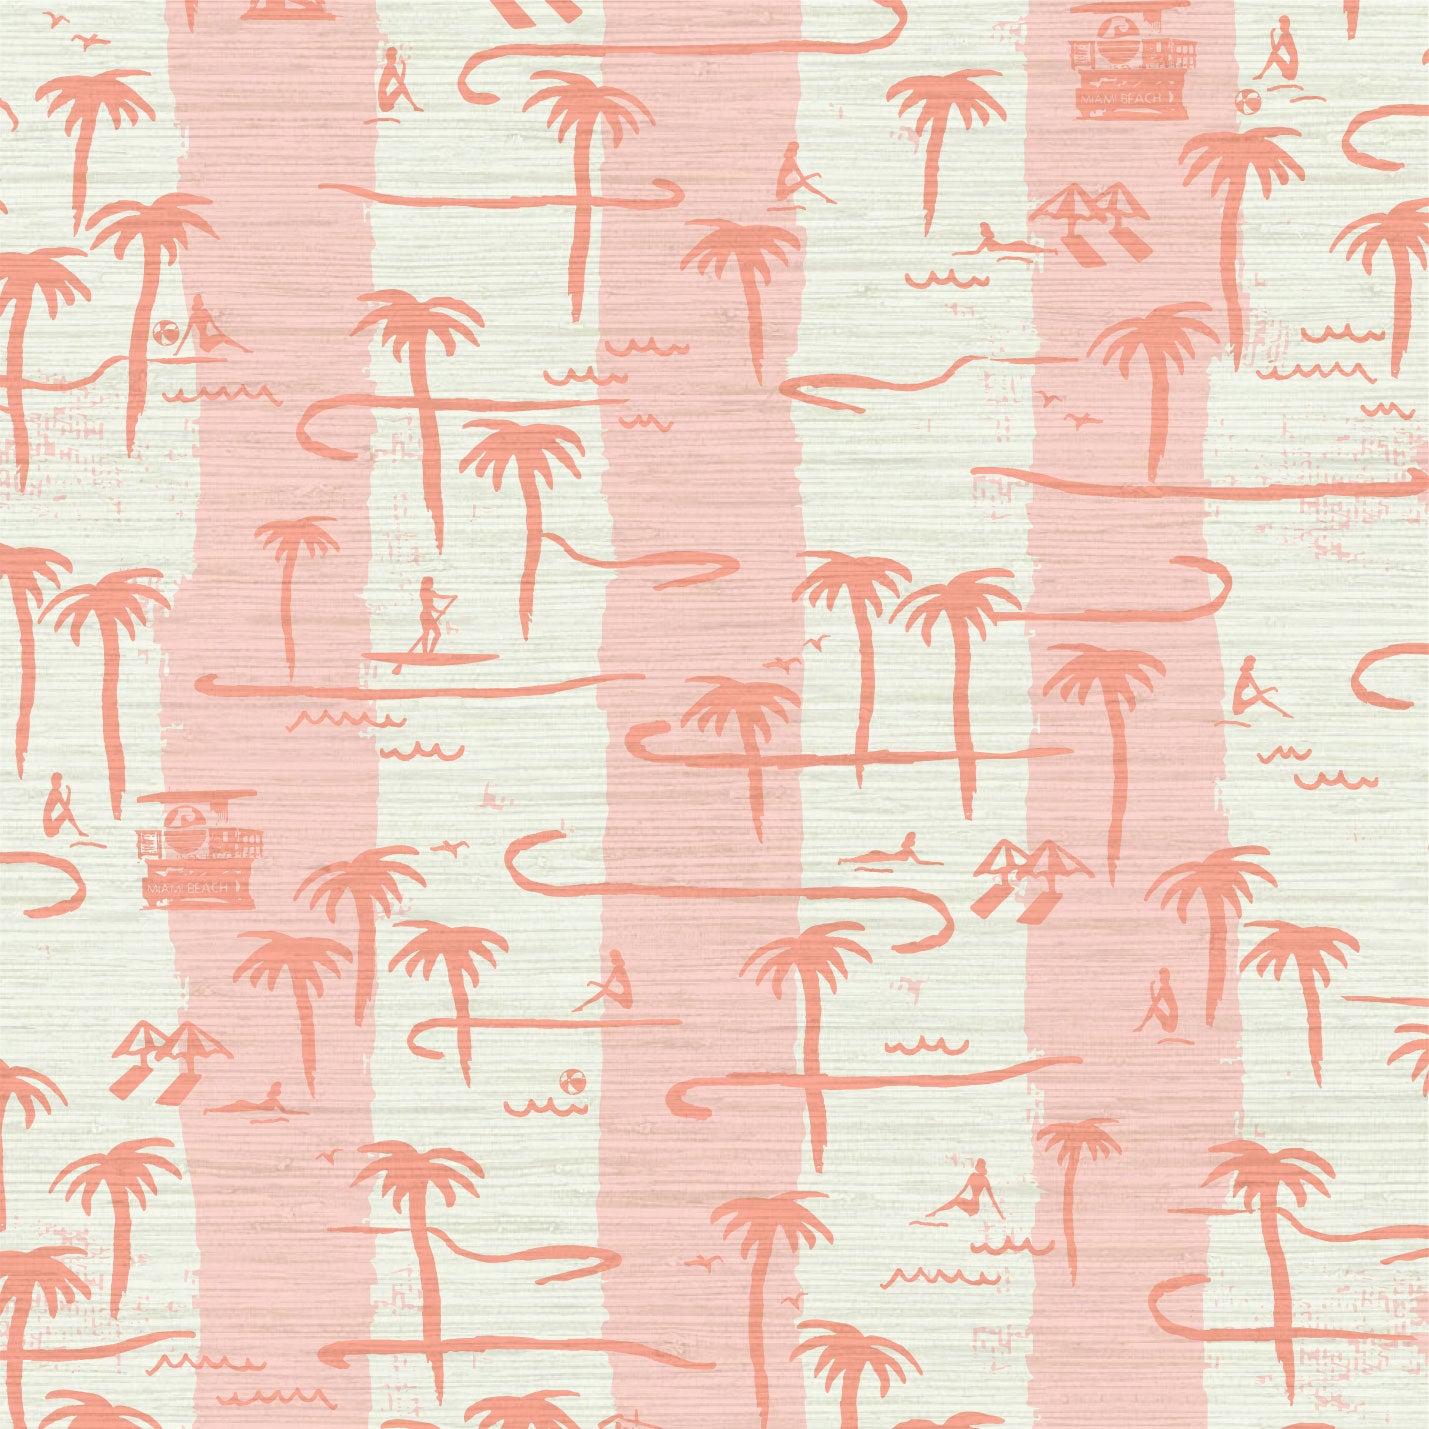 Load image into Gallery viewer, two color vertical stripe beach print featuring palm trees, beachgoers, lifeguard stands and ocean waves Grasscloth Natural Textured Eco-Friendly Non-toxic High-quality  Sustainable practices Sustainability Interior Design Wall covering Bold Wallpaper Custom Tailor-made Retro chic Tropical  Seaside Coastal Seashore Waterfront Vacation home styling Retreat Relaxed beach vibes Beach cottage Shoreline Oceanfront Nautical white pink baby light coral dark pink red
